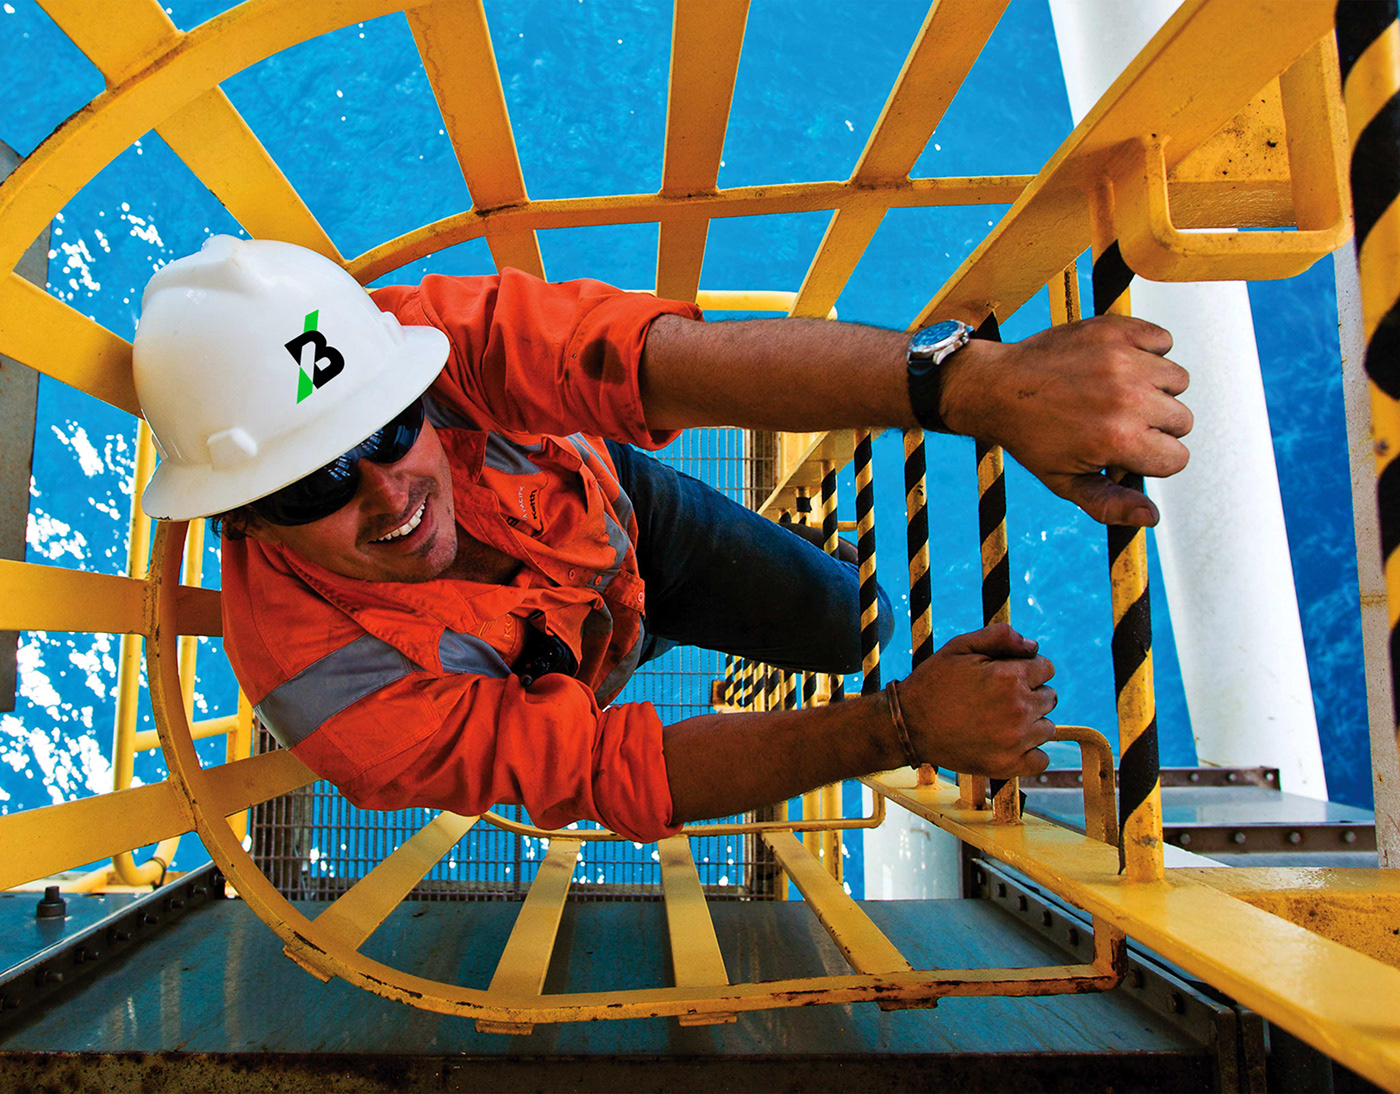 Buel - Brand identity mining services - worker climbing ladder at oil rig